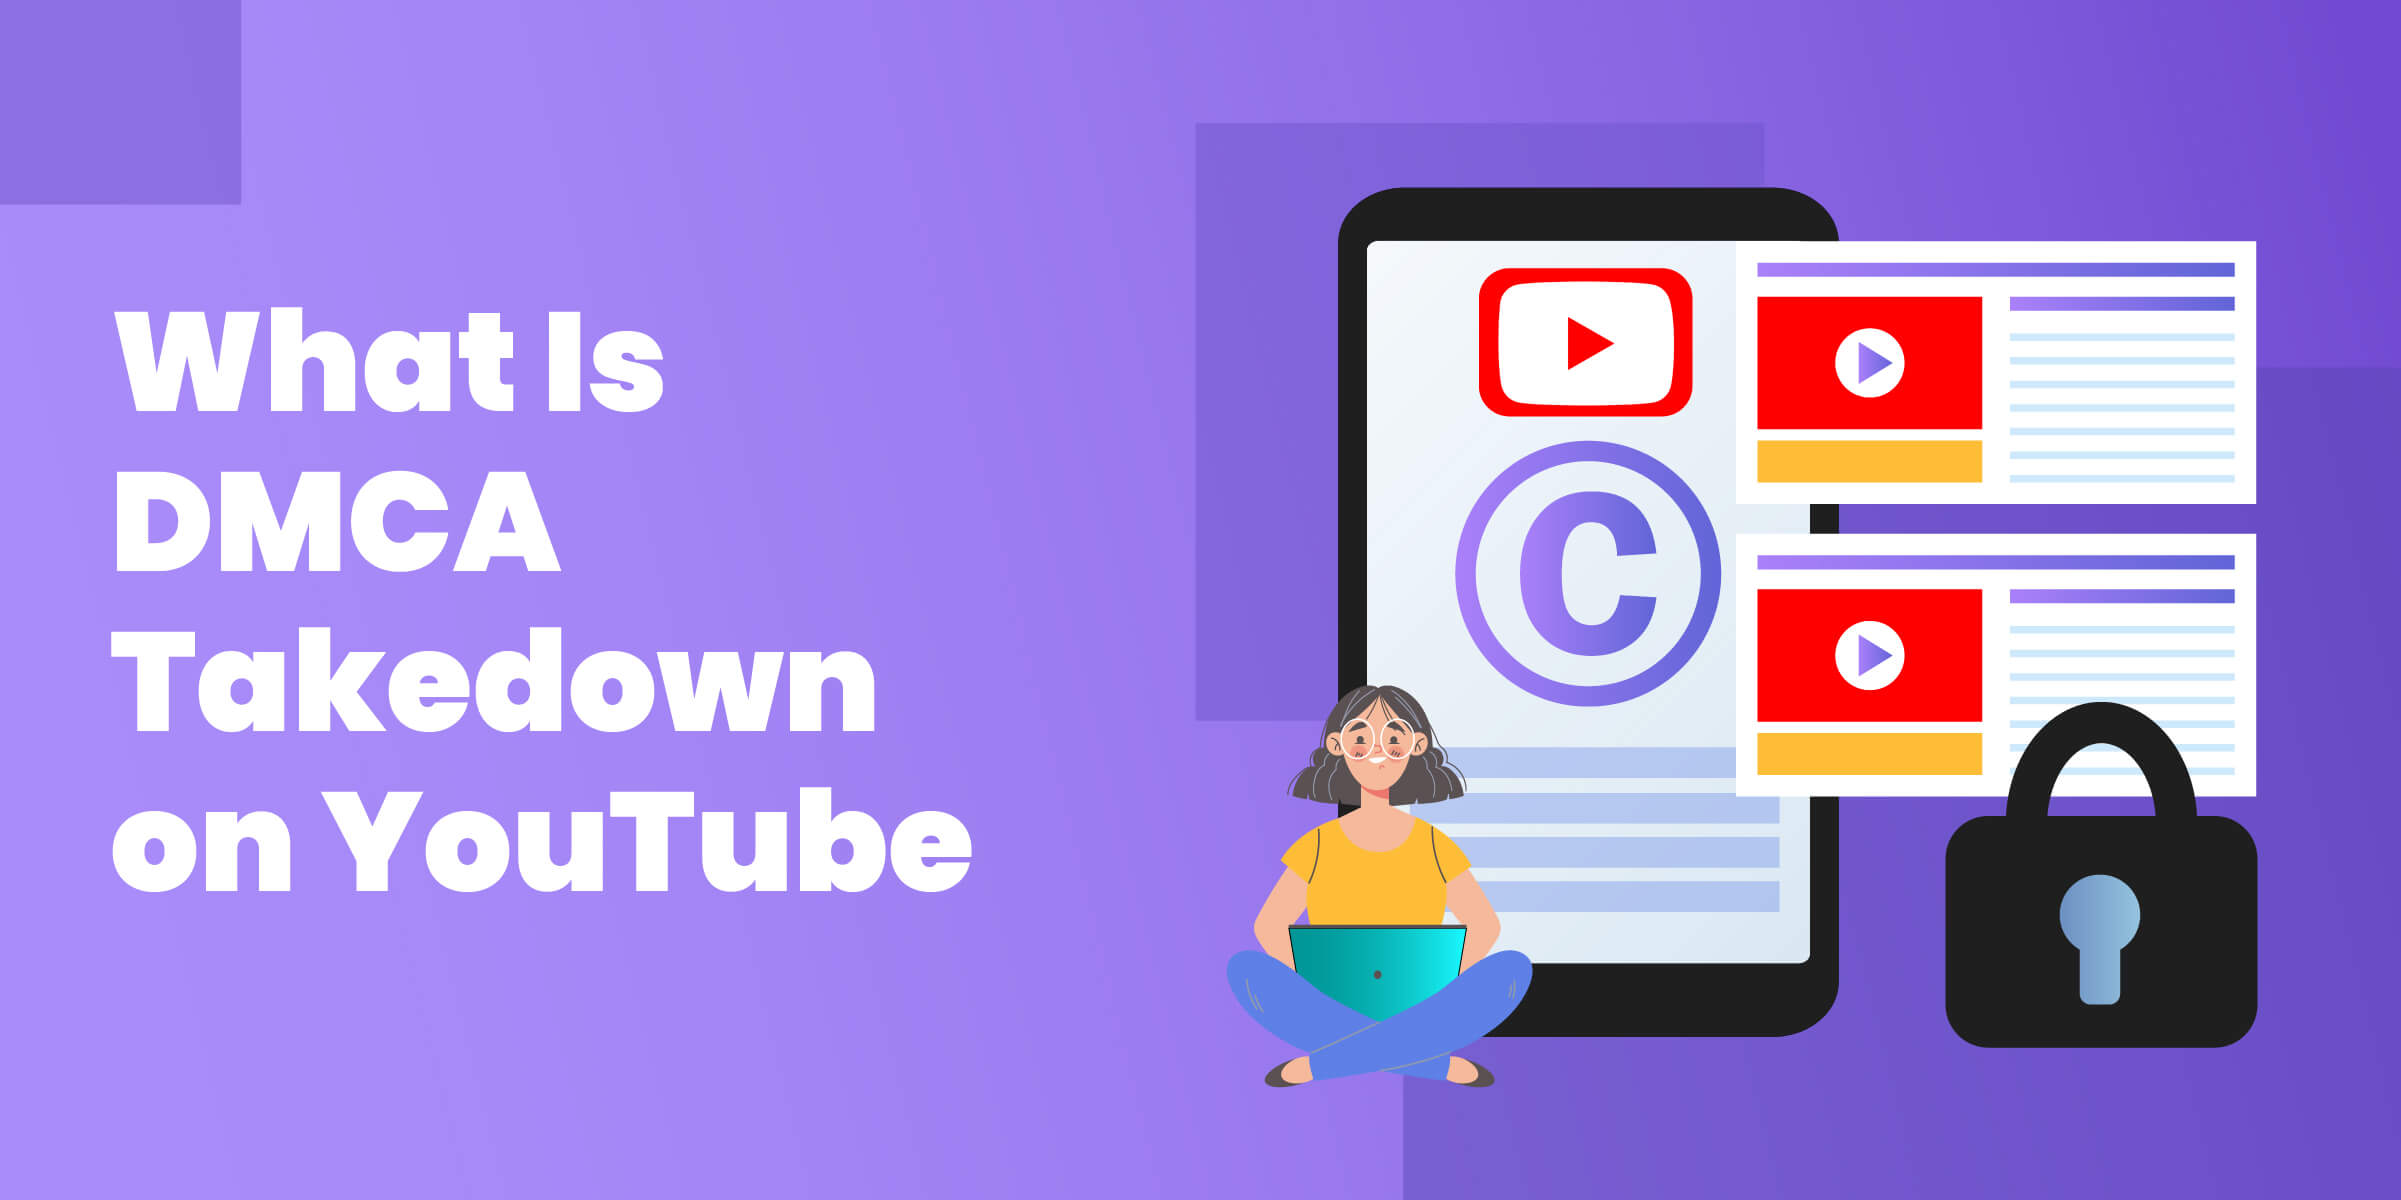 What Is DMCA Takedown on YouTube